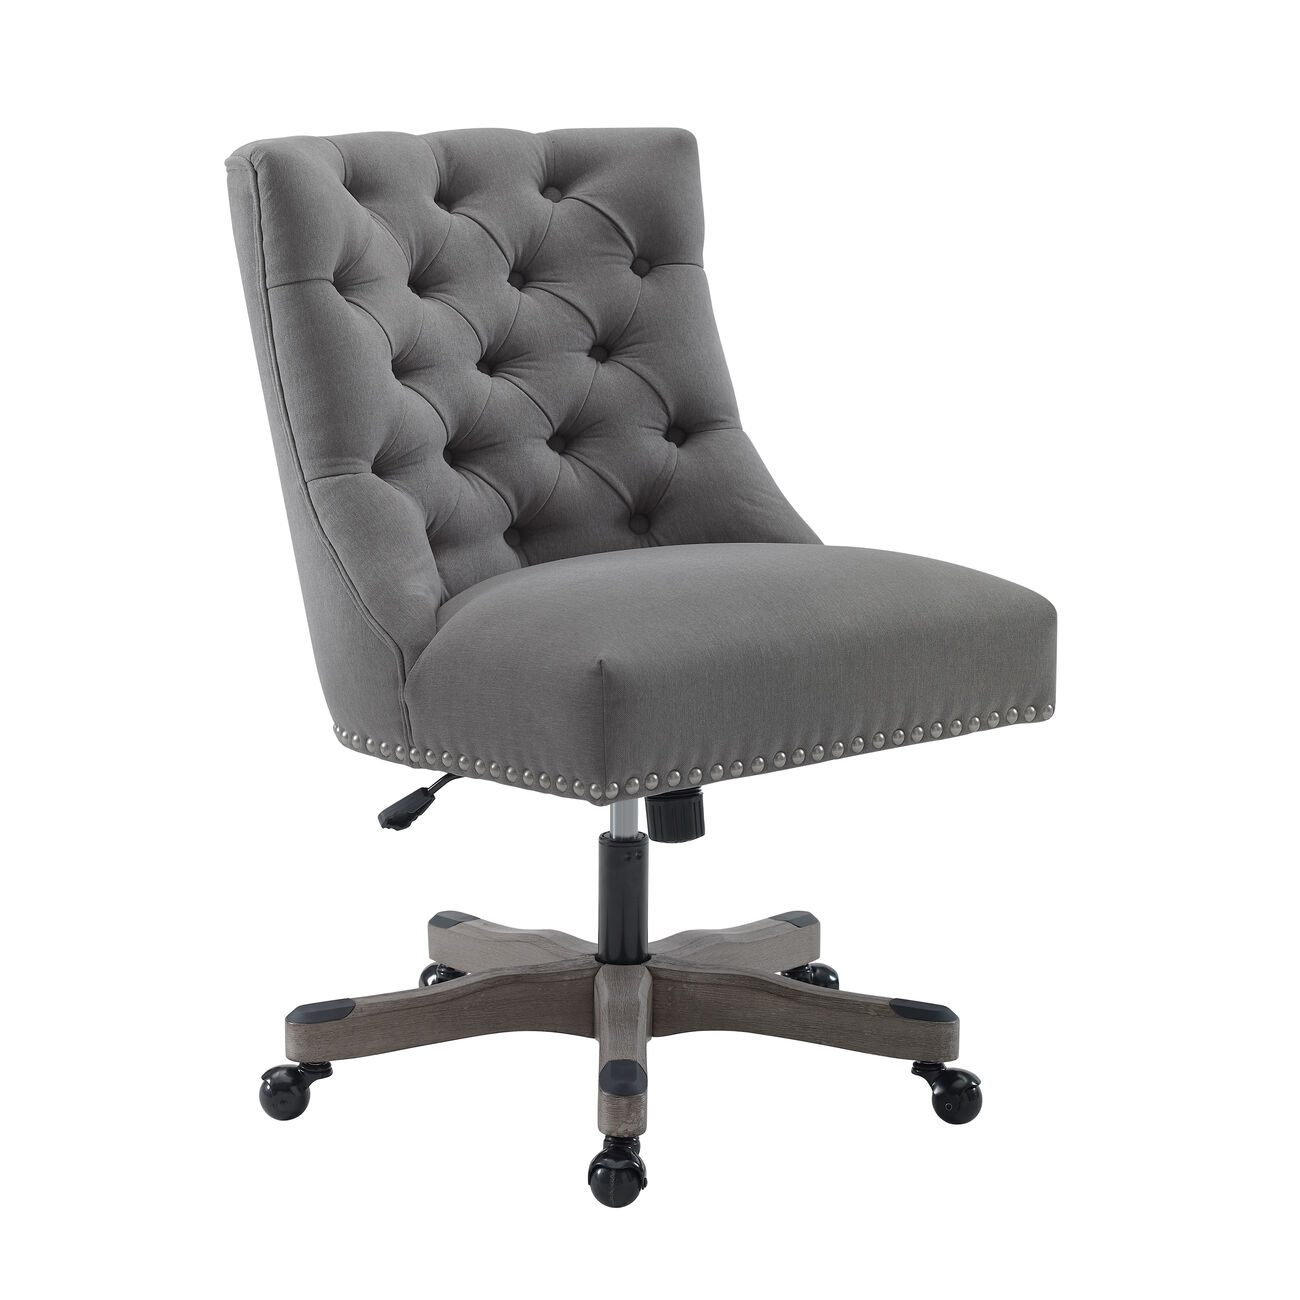 Button Tufted Fabric Upholstered Swivel Office Chair with Casters, Gray